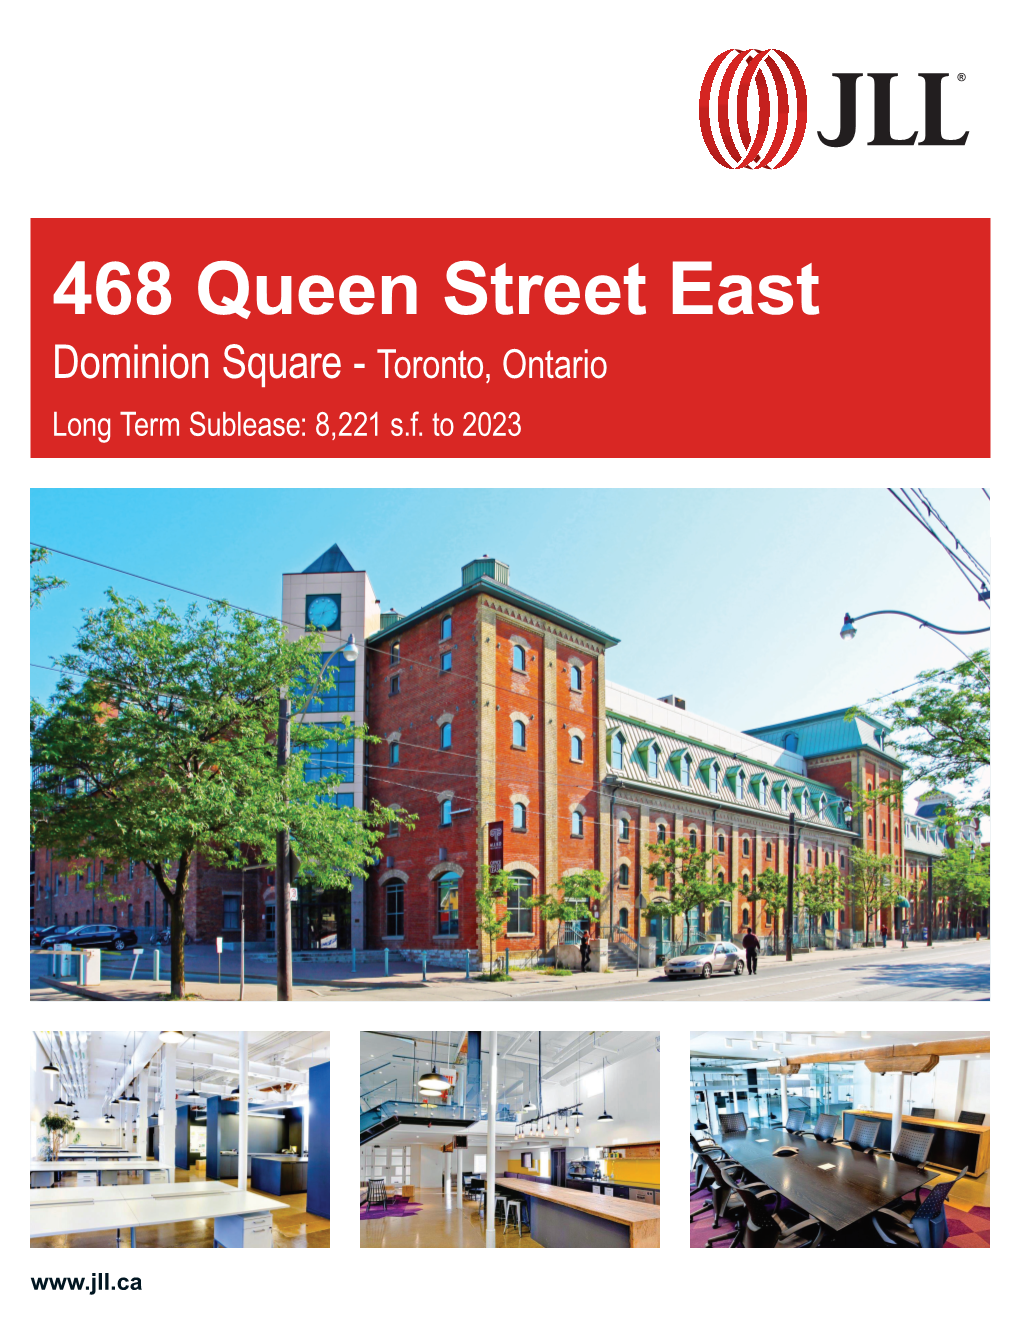 468 Queen Street East Dominion Square - Toronto, Ontario Long Term Sublease: 8,221 S.F